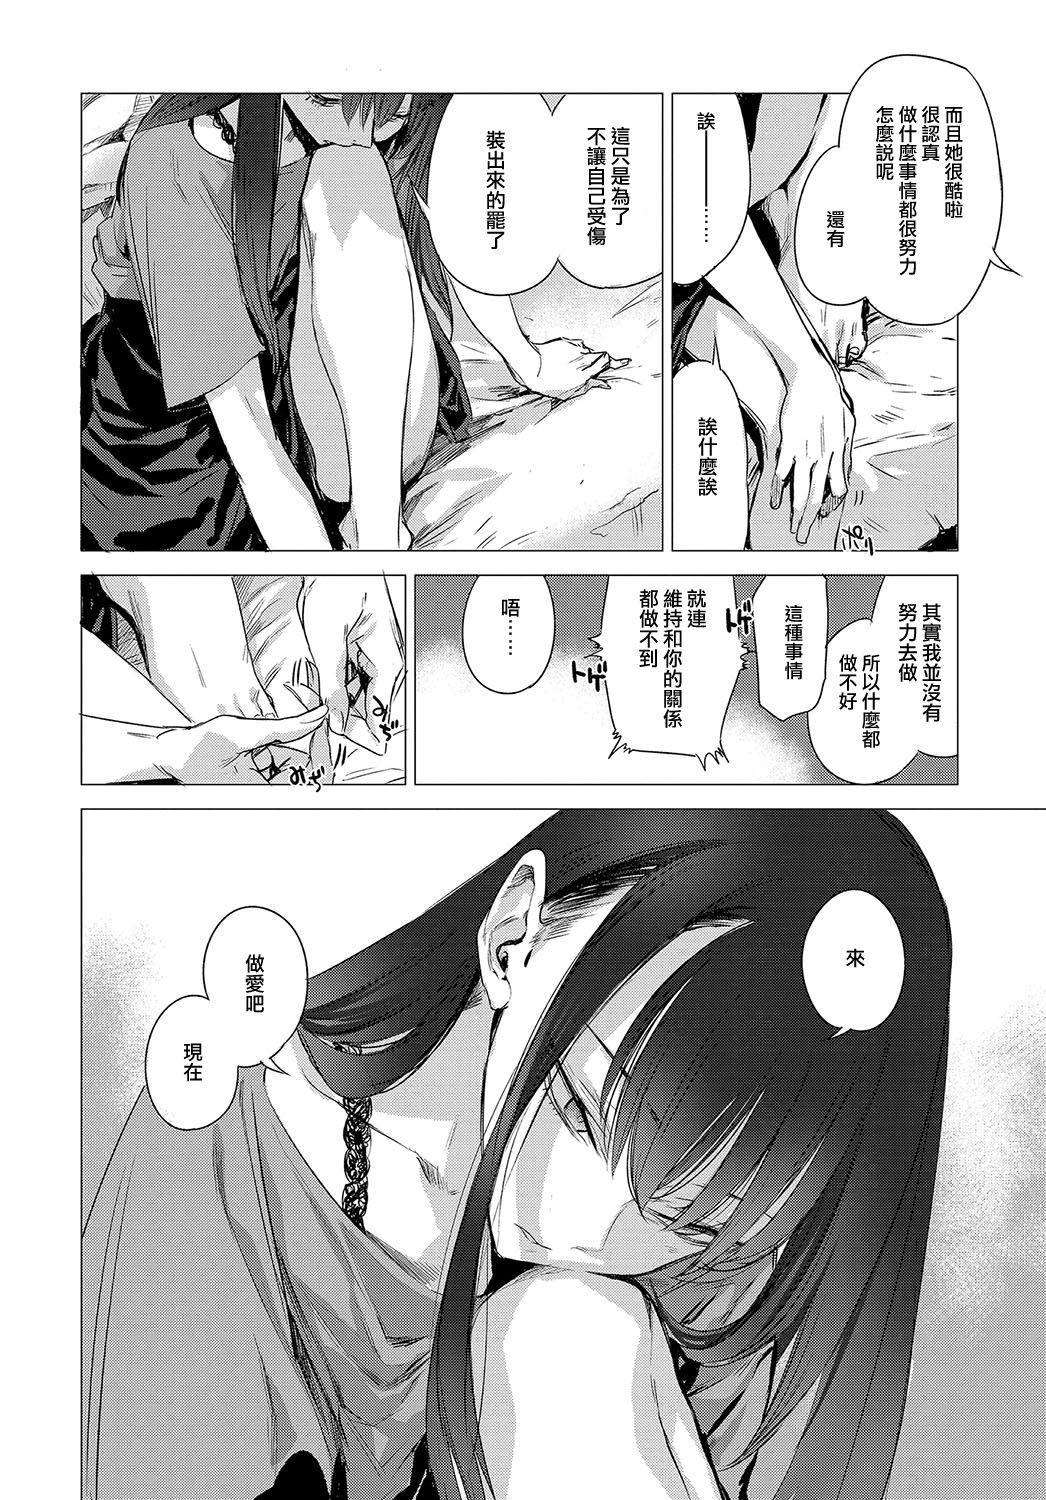 Climax Kanojo no Himitsu II - The Secret of Her Pounding - Page 4